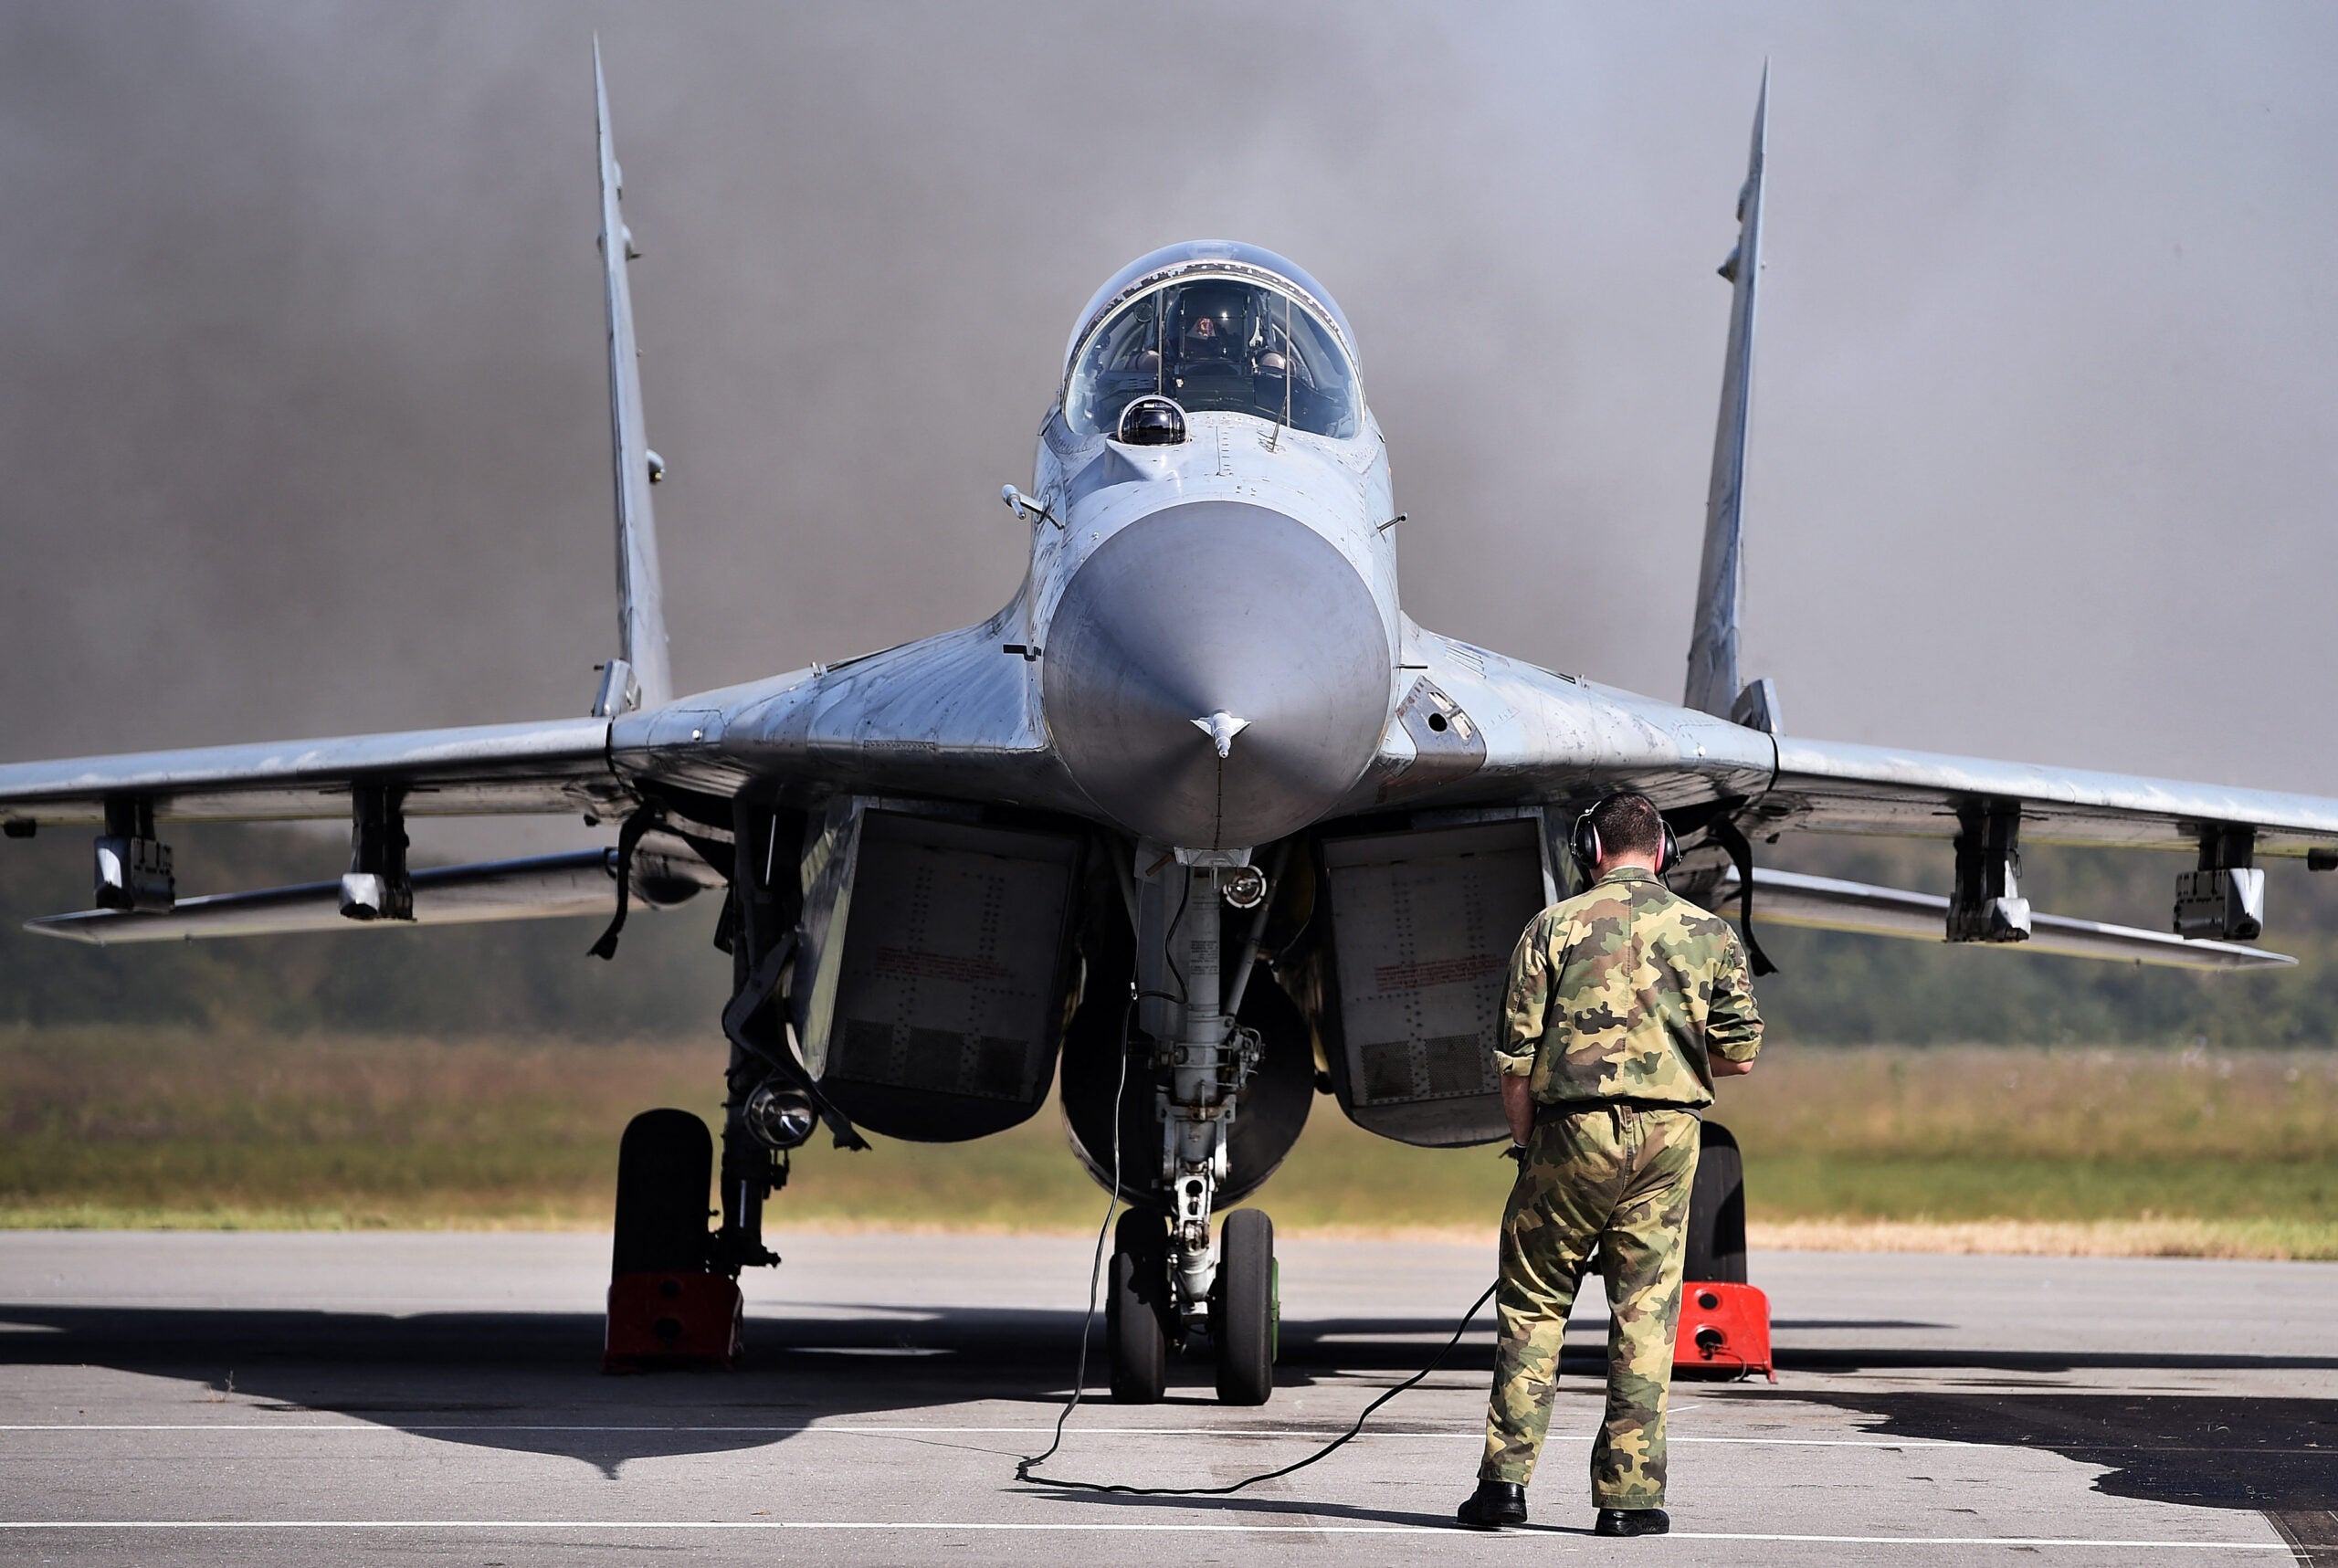 A Serbian Air Force MIG 29 prepares for takeoff at the Batajnica military airport near Belgrade on October 14, 2014. Various units of the Serbian Army prepare for the military parade marking the 70th anniversary of the liberation of Belgrade in WWII scheduled for October 16, with Russian President Vladimir Putin attending the ceremony.  AFP PHOTO / ANDREJ ISAKOVIC (Photo by ANDREJ ISAKOVIC / AFP) (Photo by ANDREJ ISAKOVIC/AFP via Getty Images)